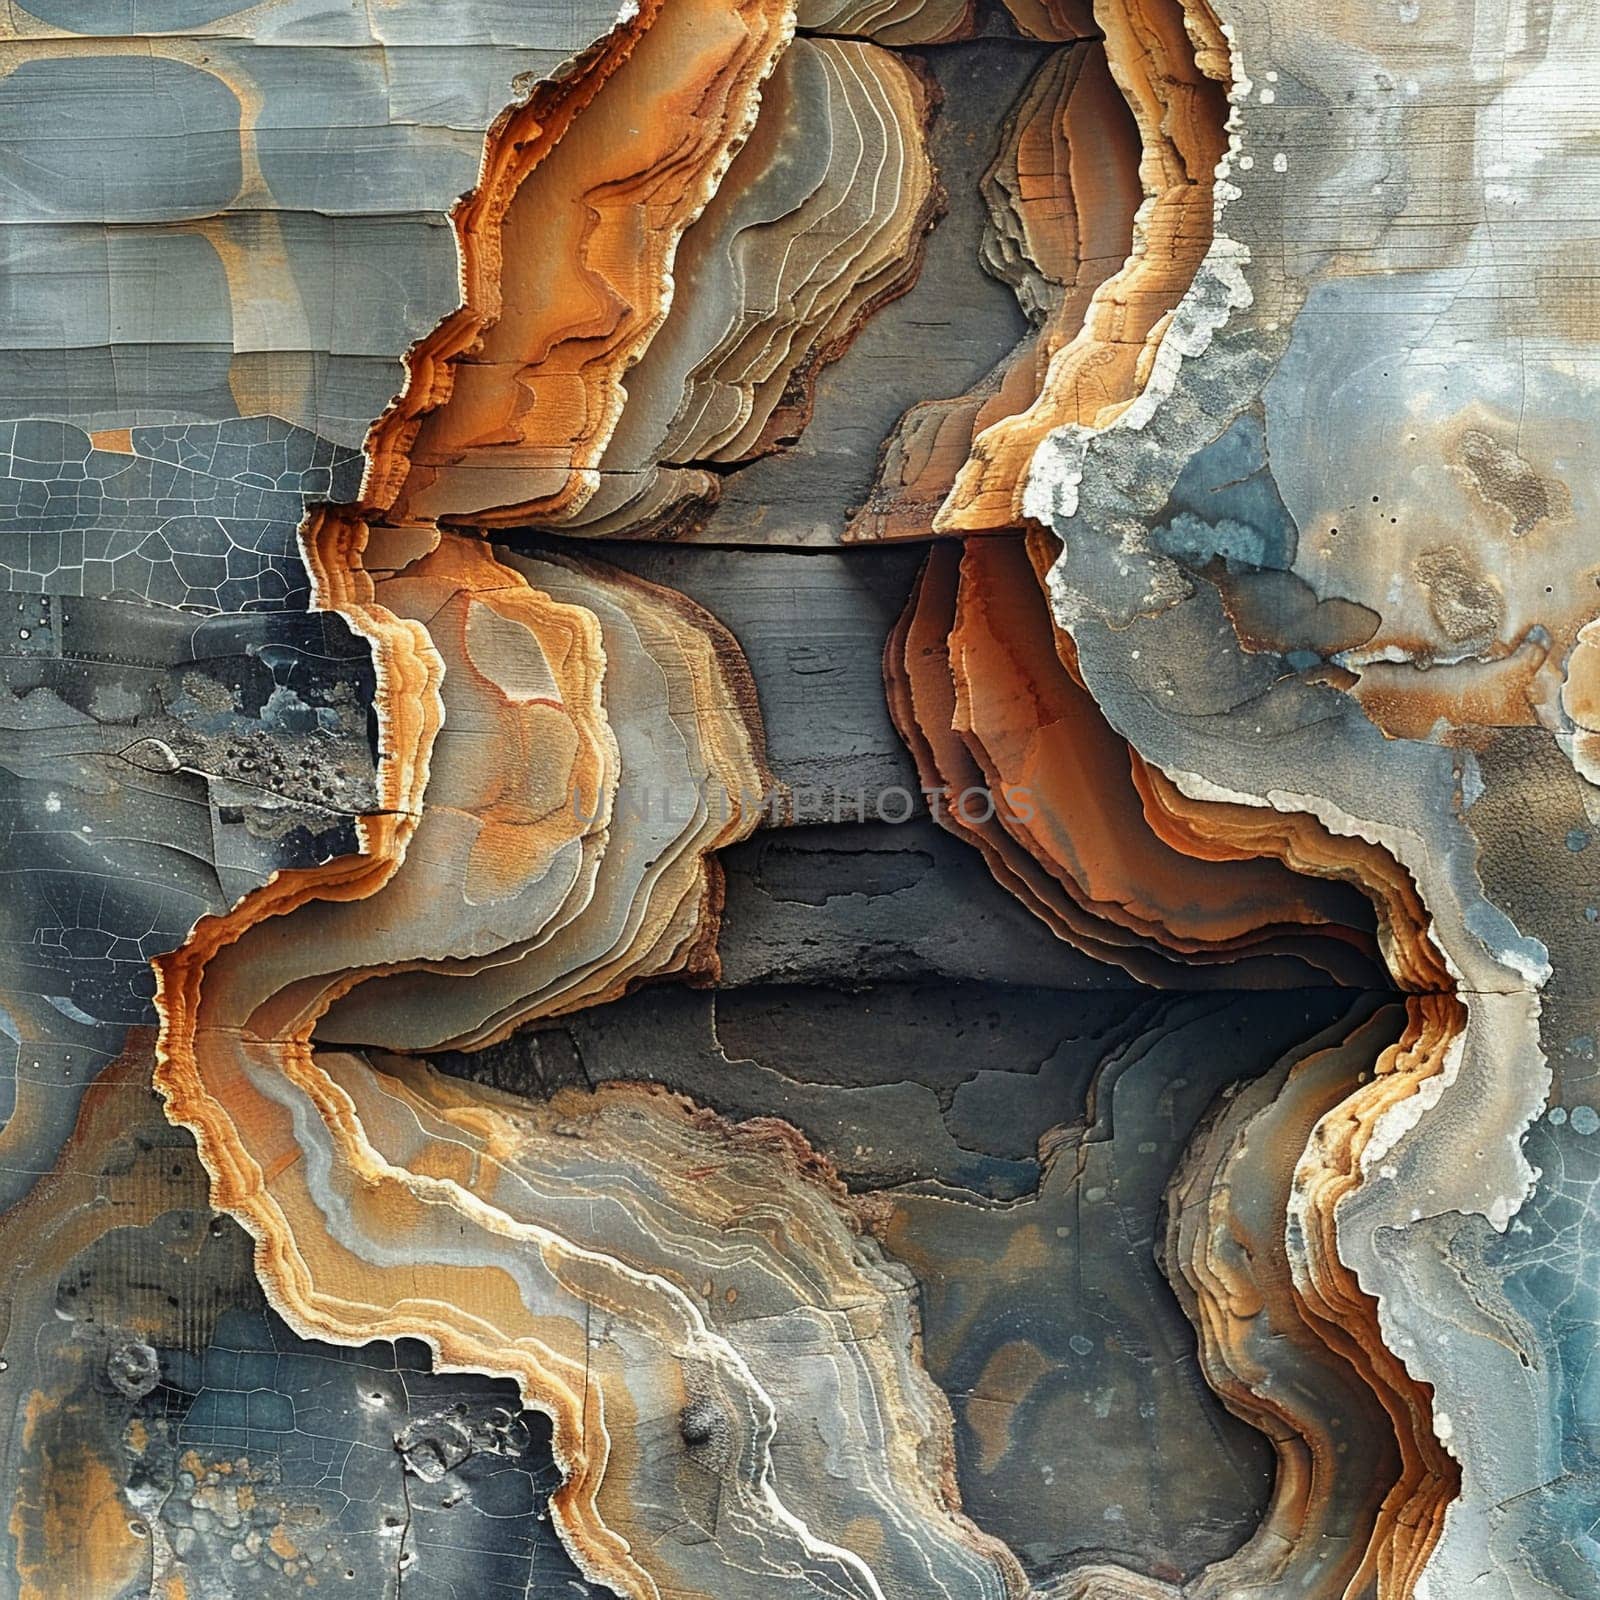 Layered rock formations in a canyon, capturing geological beauty and natural history.